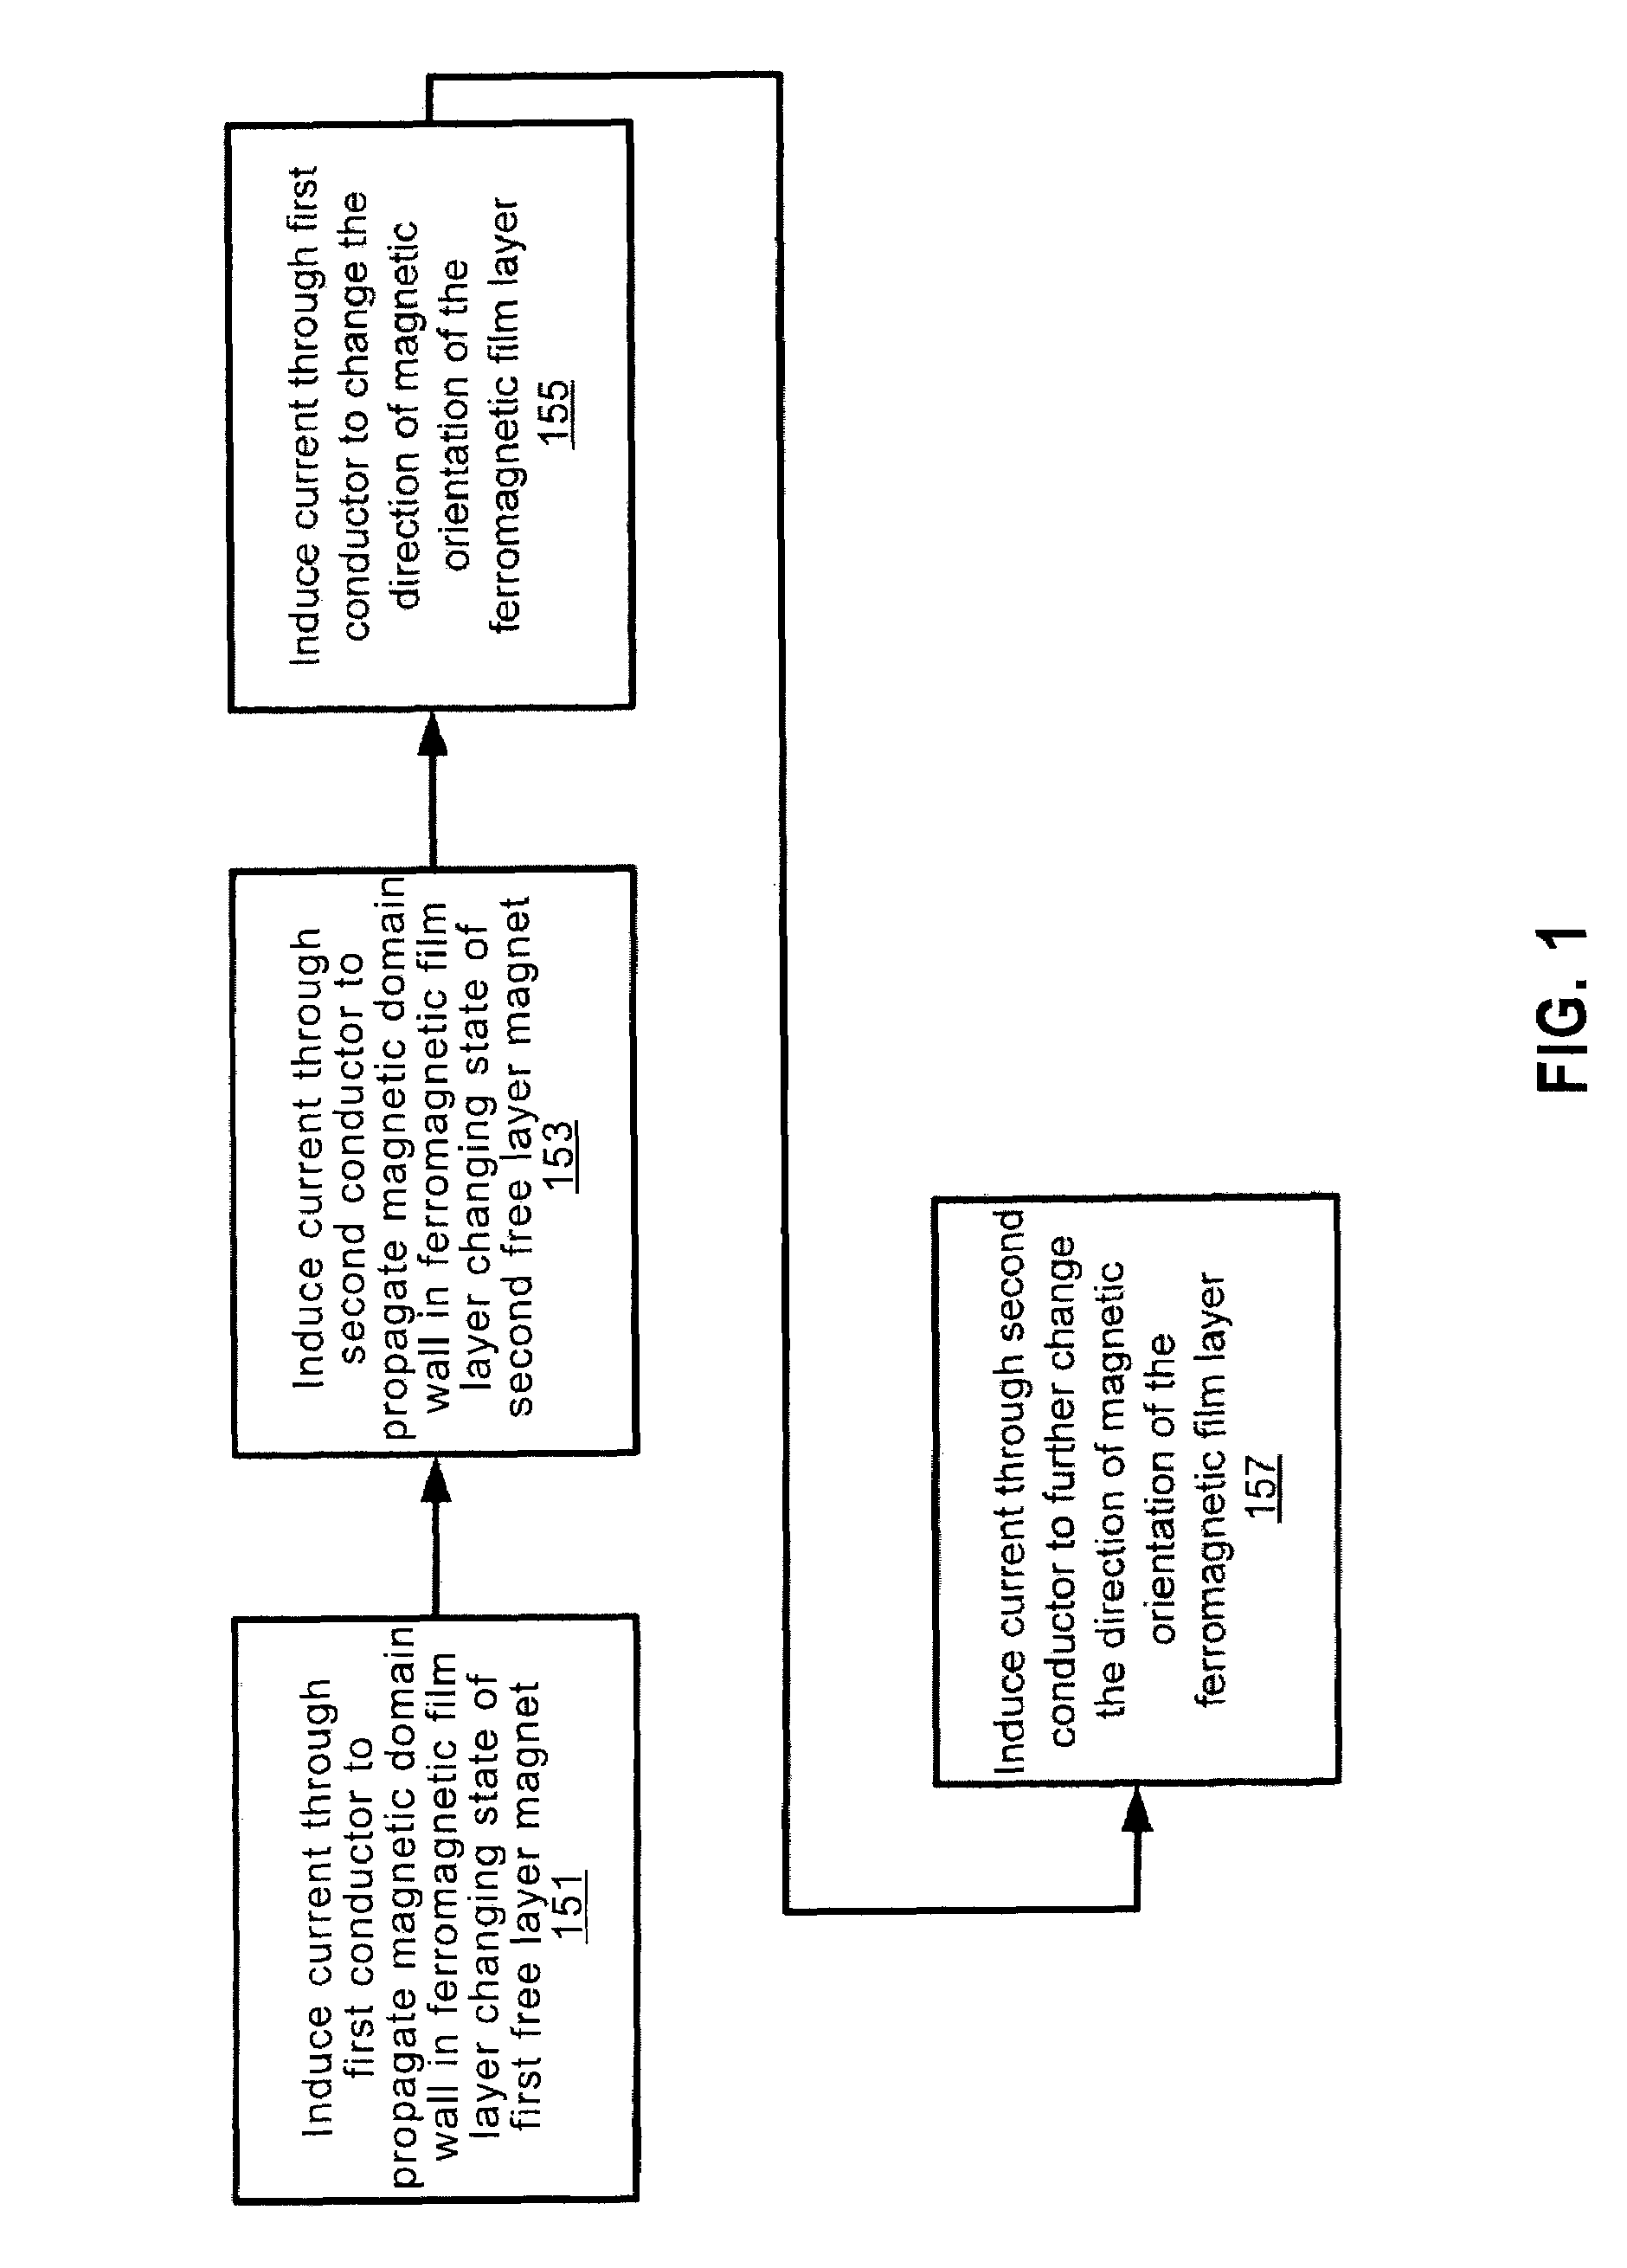 Methods involving resetting spin-torque magnetic random access memory with domain wall